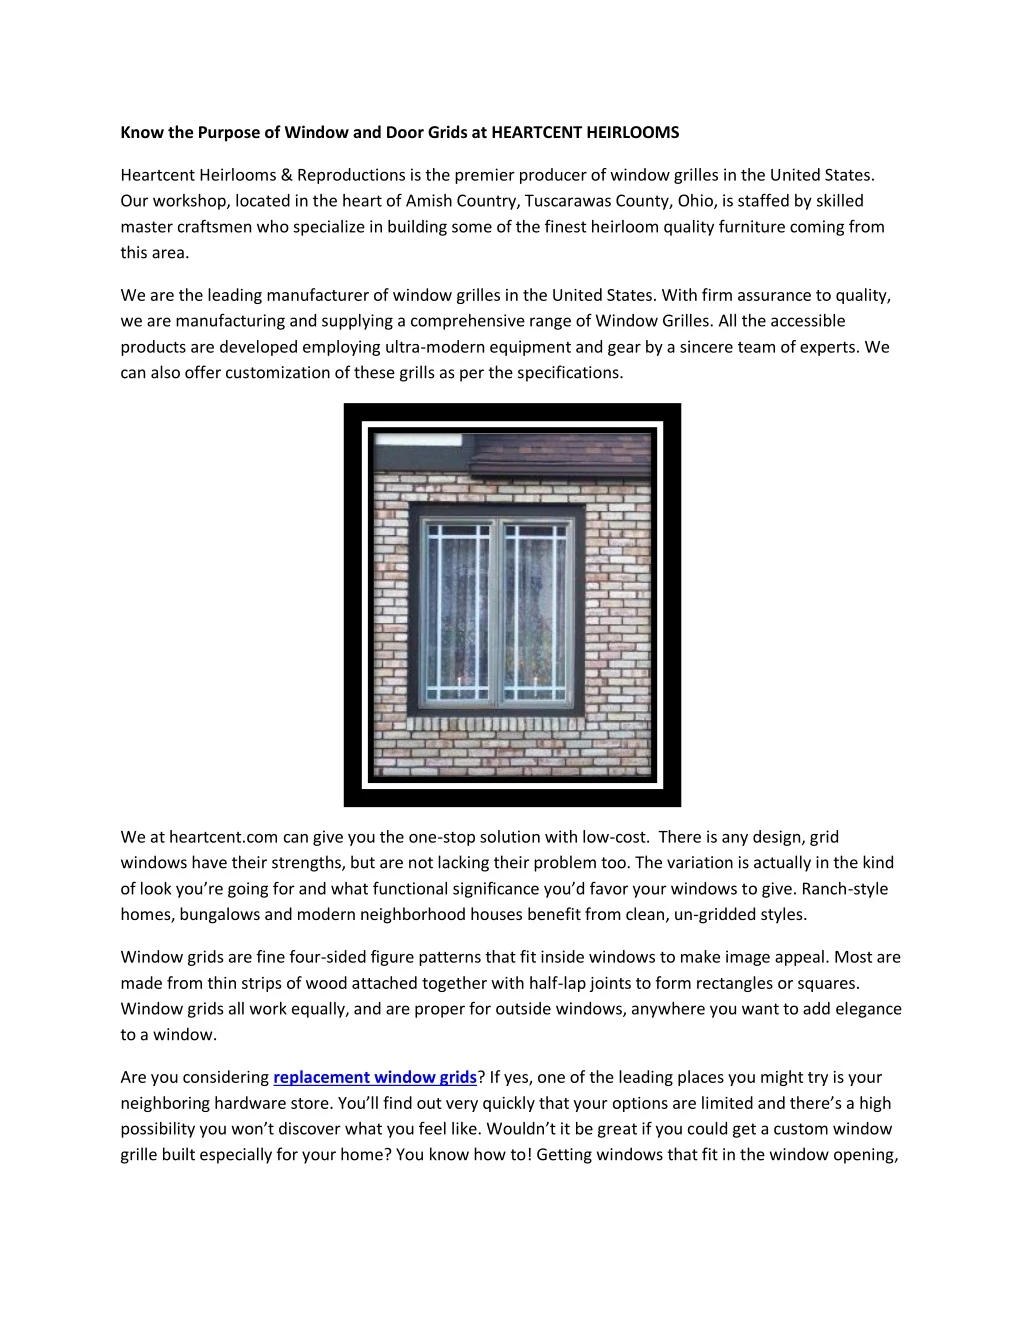 know the purpose of window and door grids